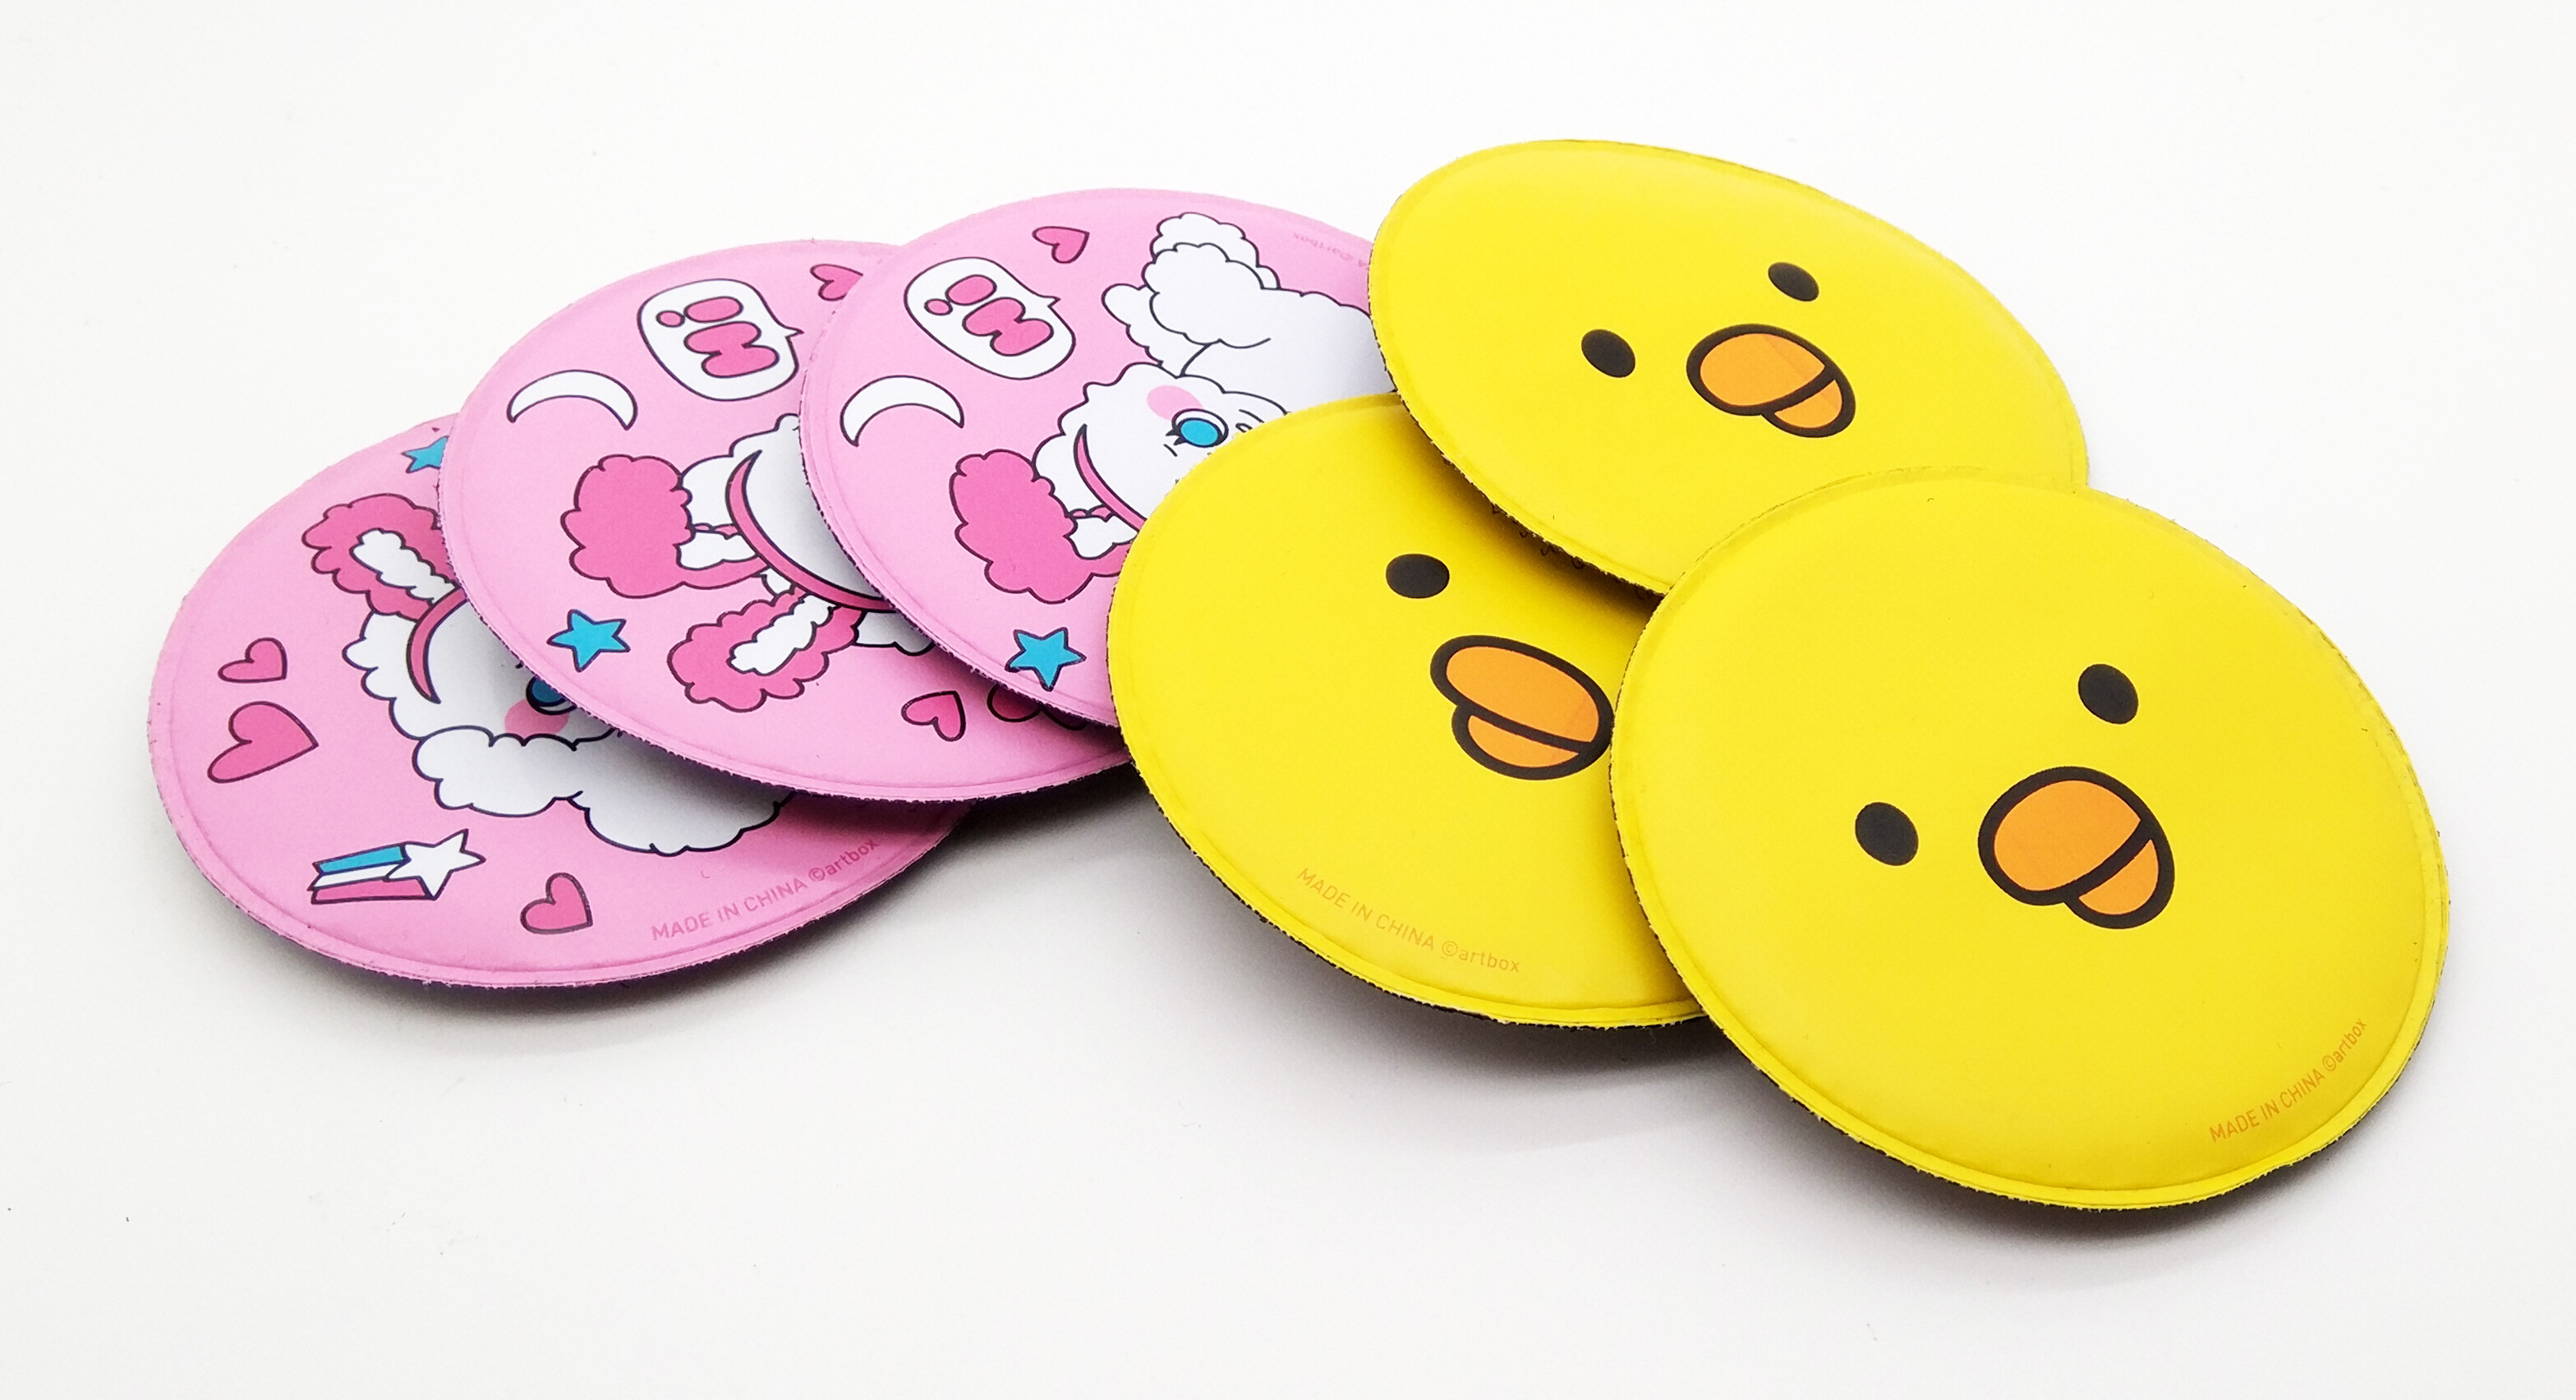 China Logo / Picture Printed  Hair Clips For Baby Girls Eco Friendly on sale